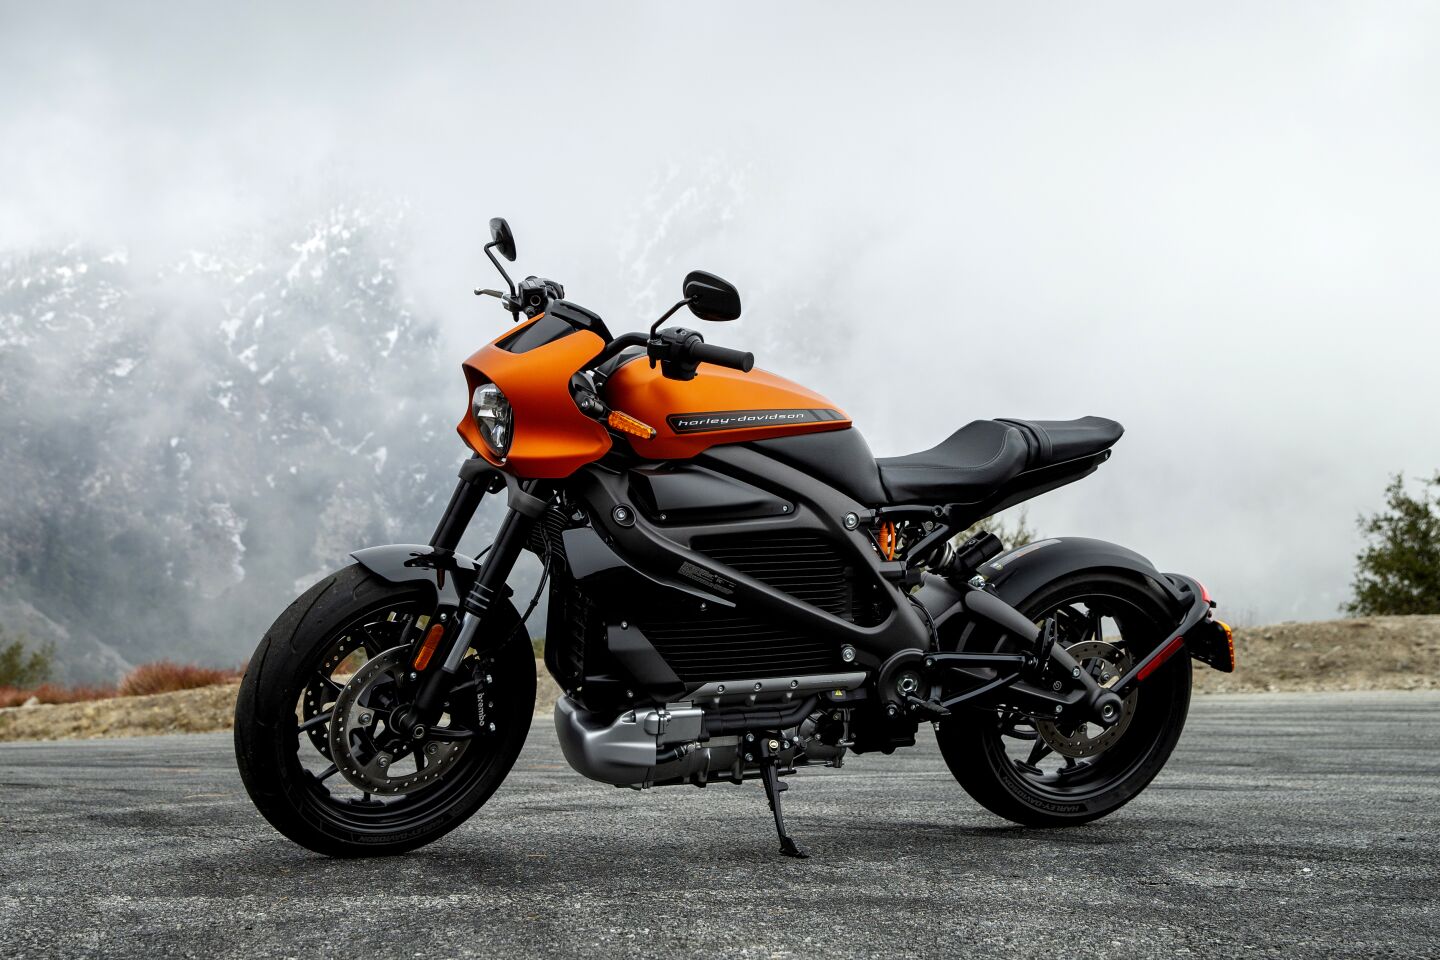 2020 Harley-Davidson LiveWire electric motorcycle